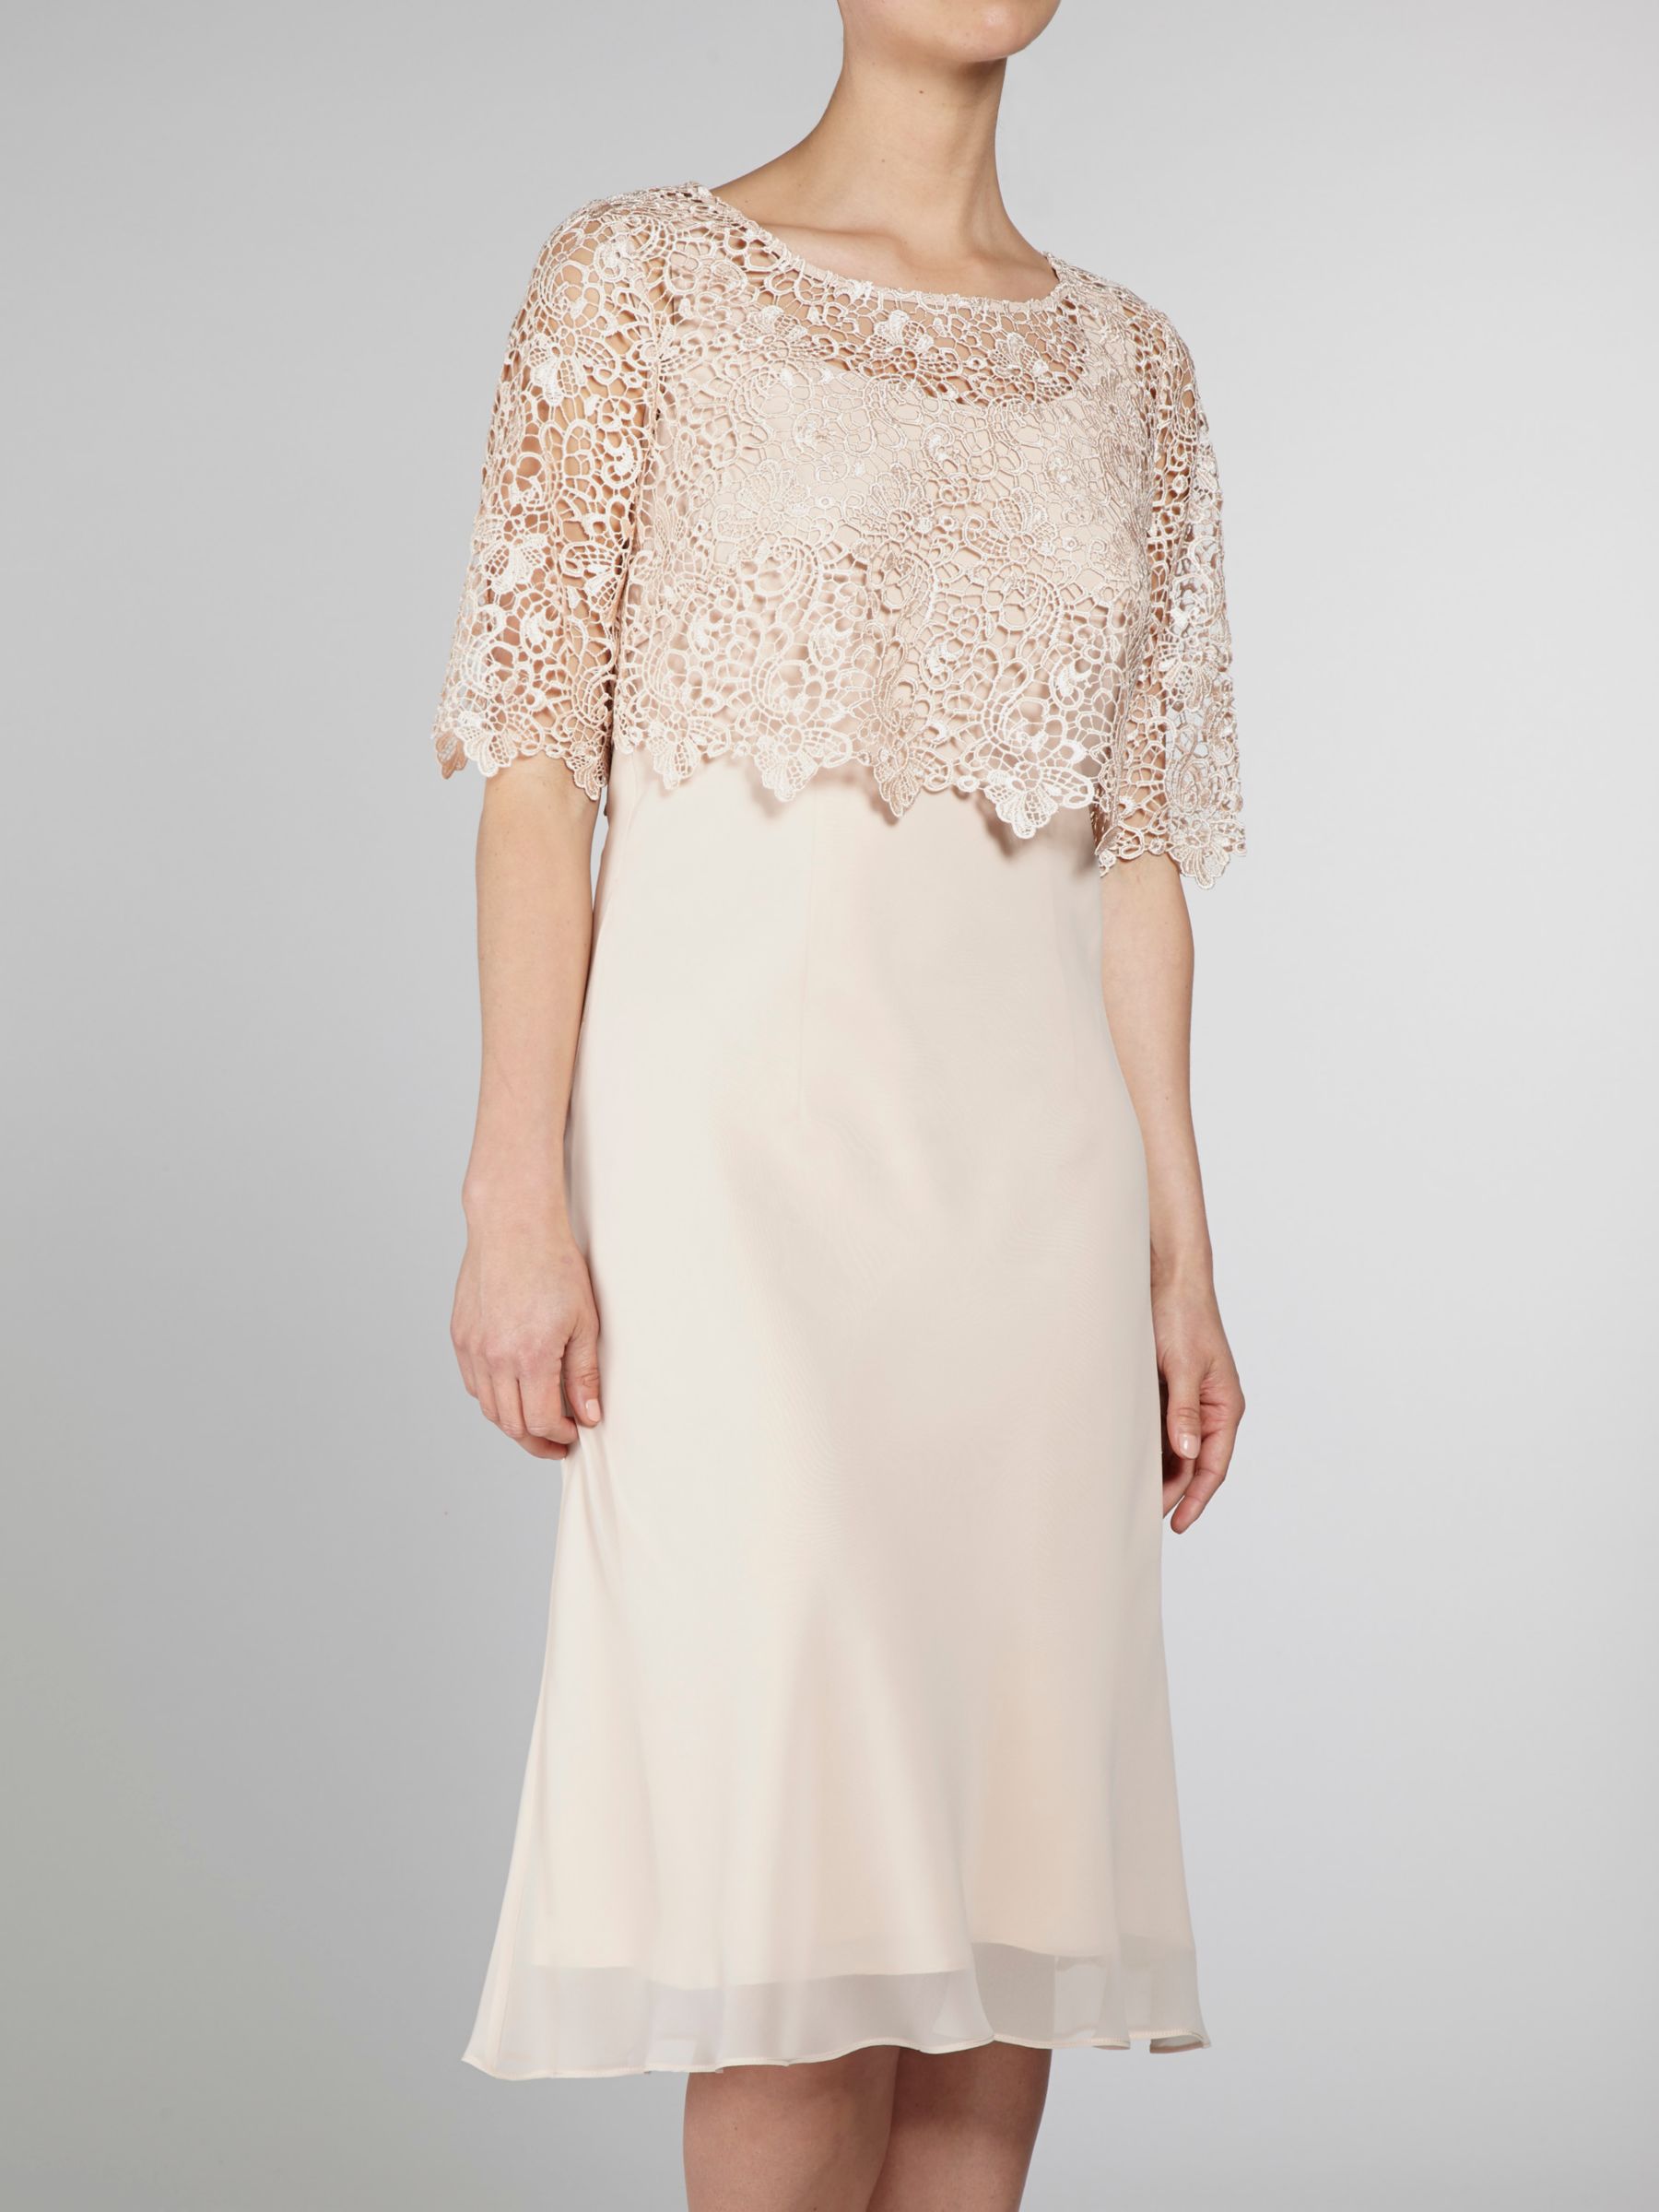 Gina Bacconi Chiffon Dress With Guipure Lace Top, Beige at John Lewis ...